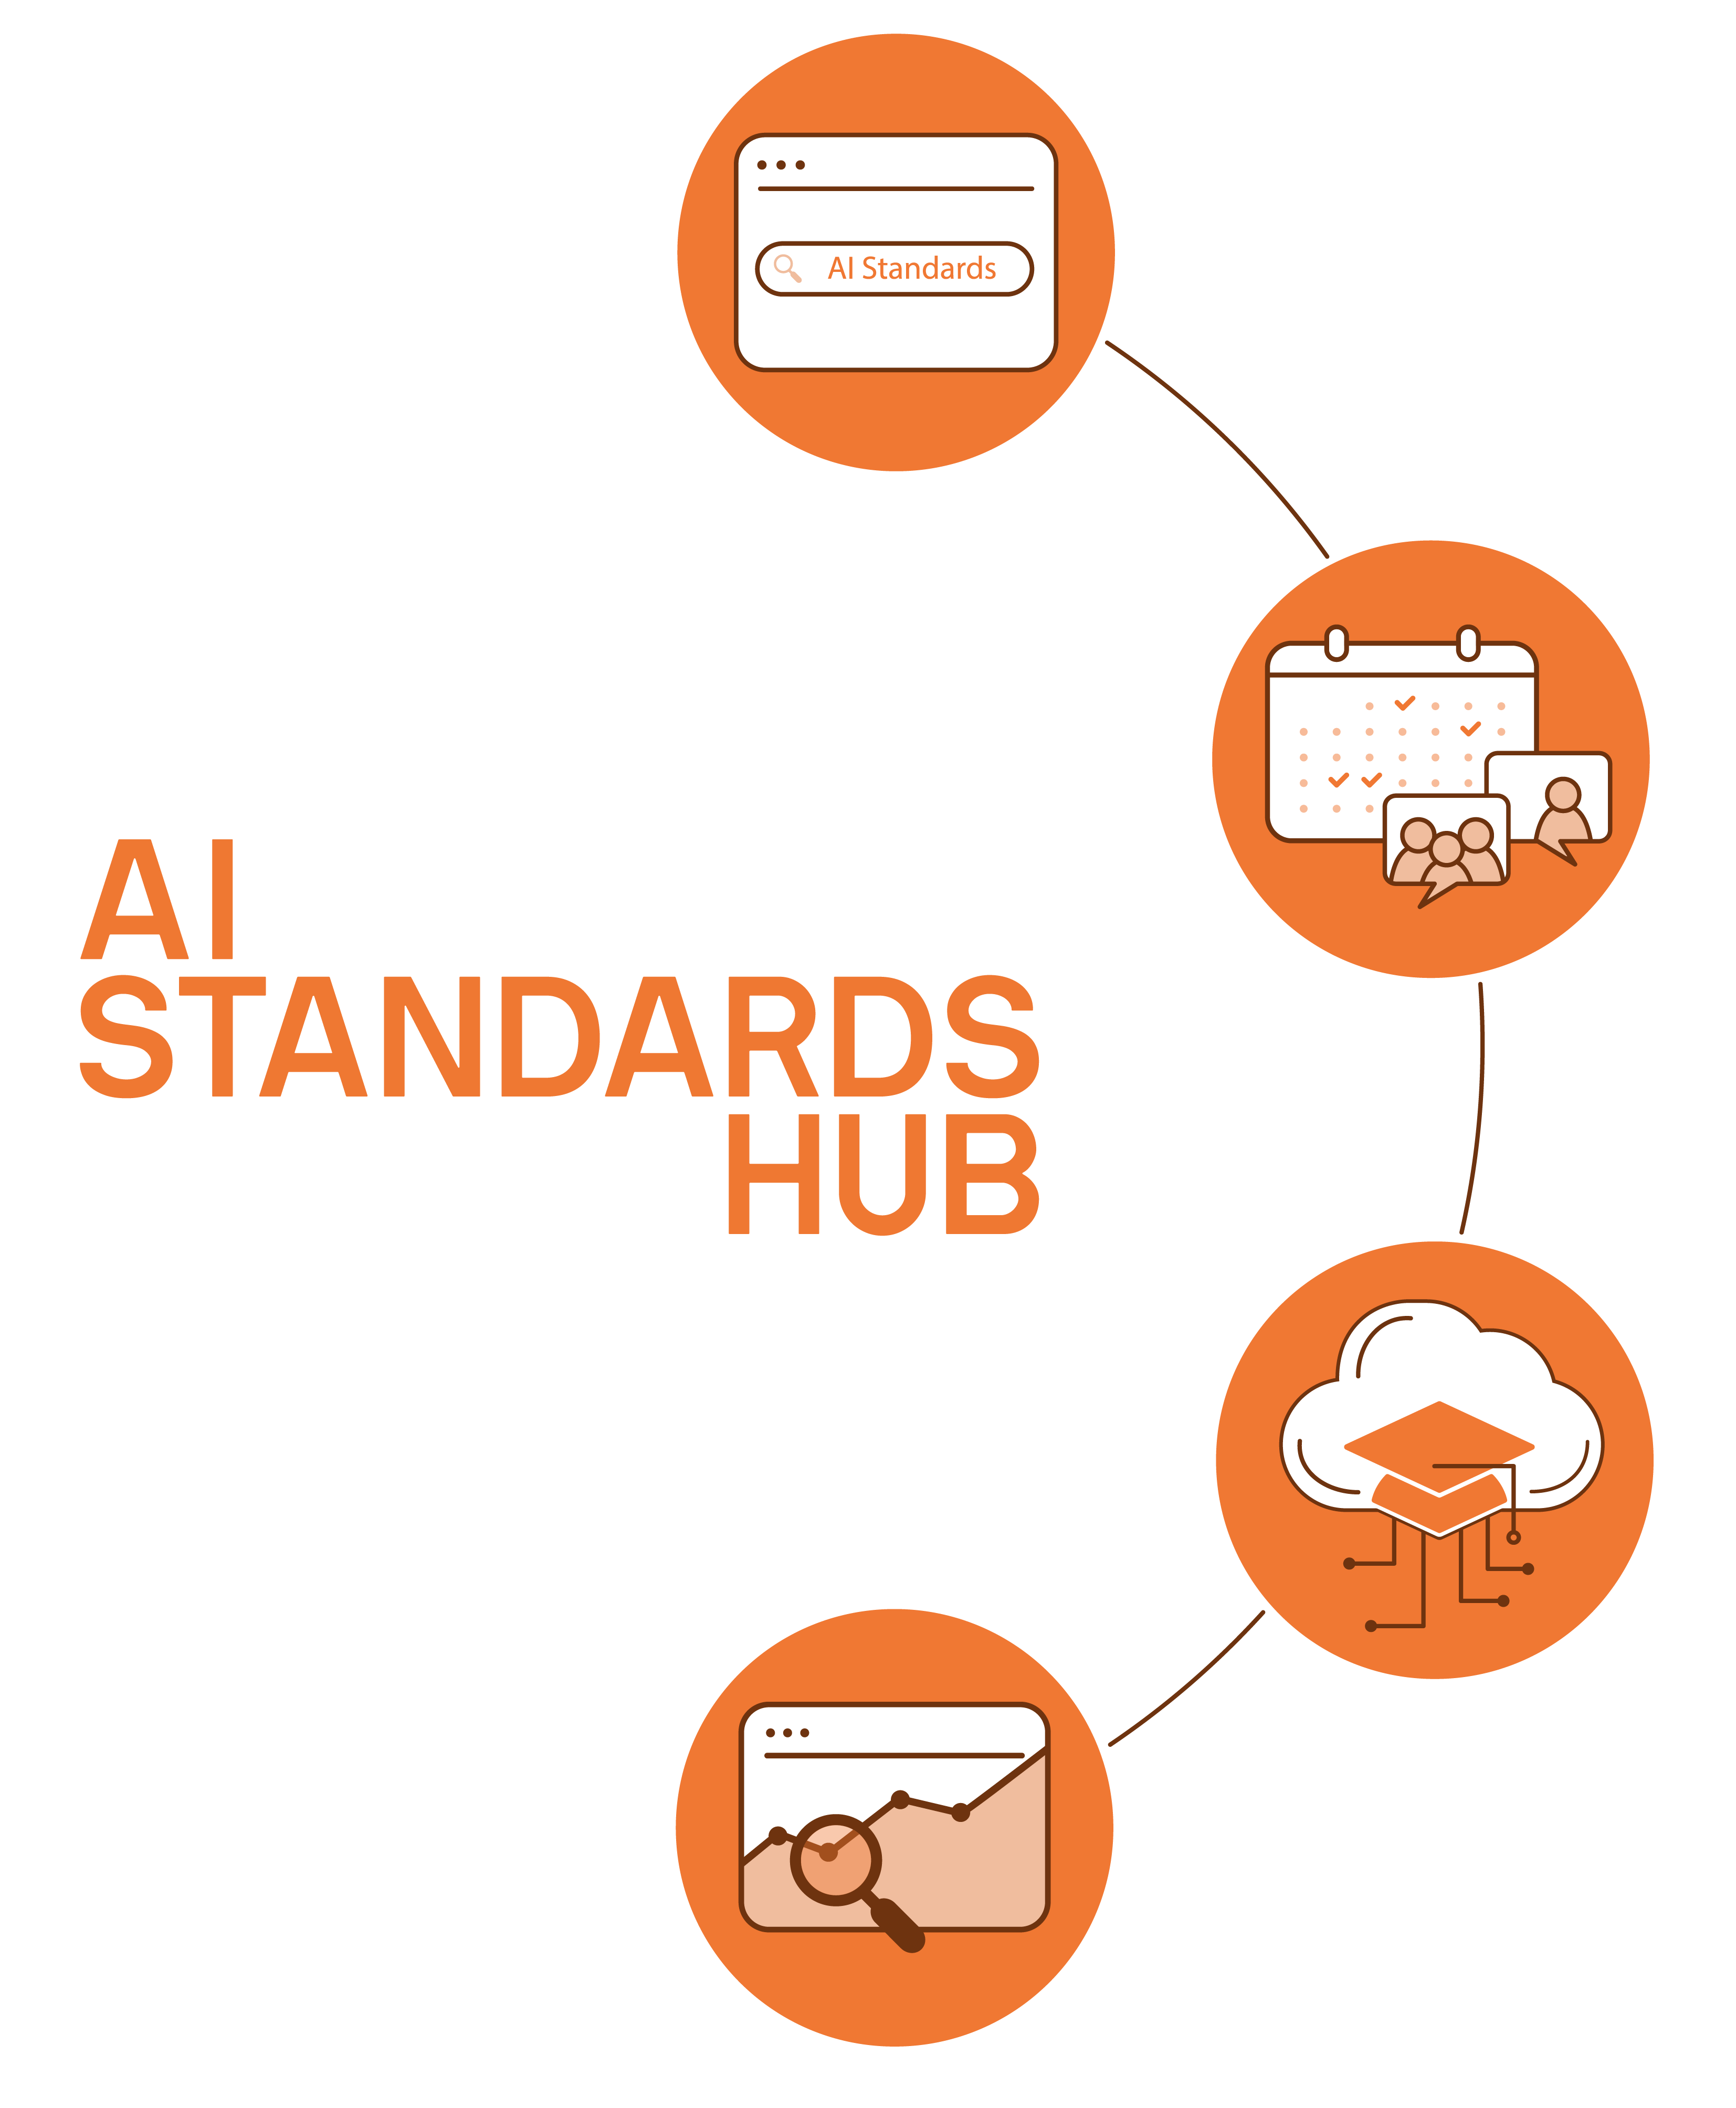 4 icons referencing the four pillars of the AI Standards Hub, as described in the text, next to the AI Standards Hub logo